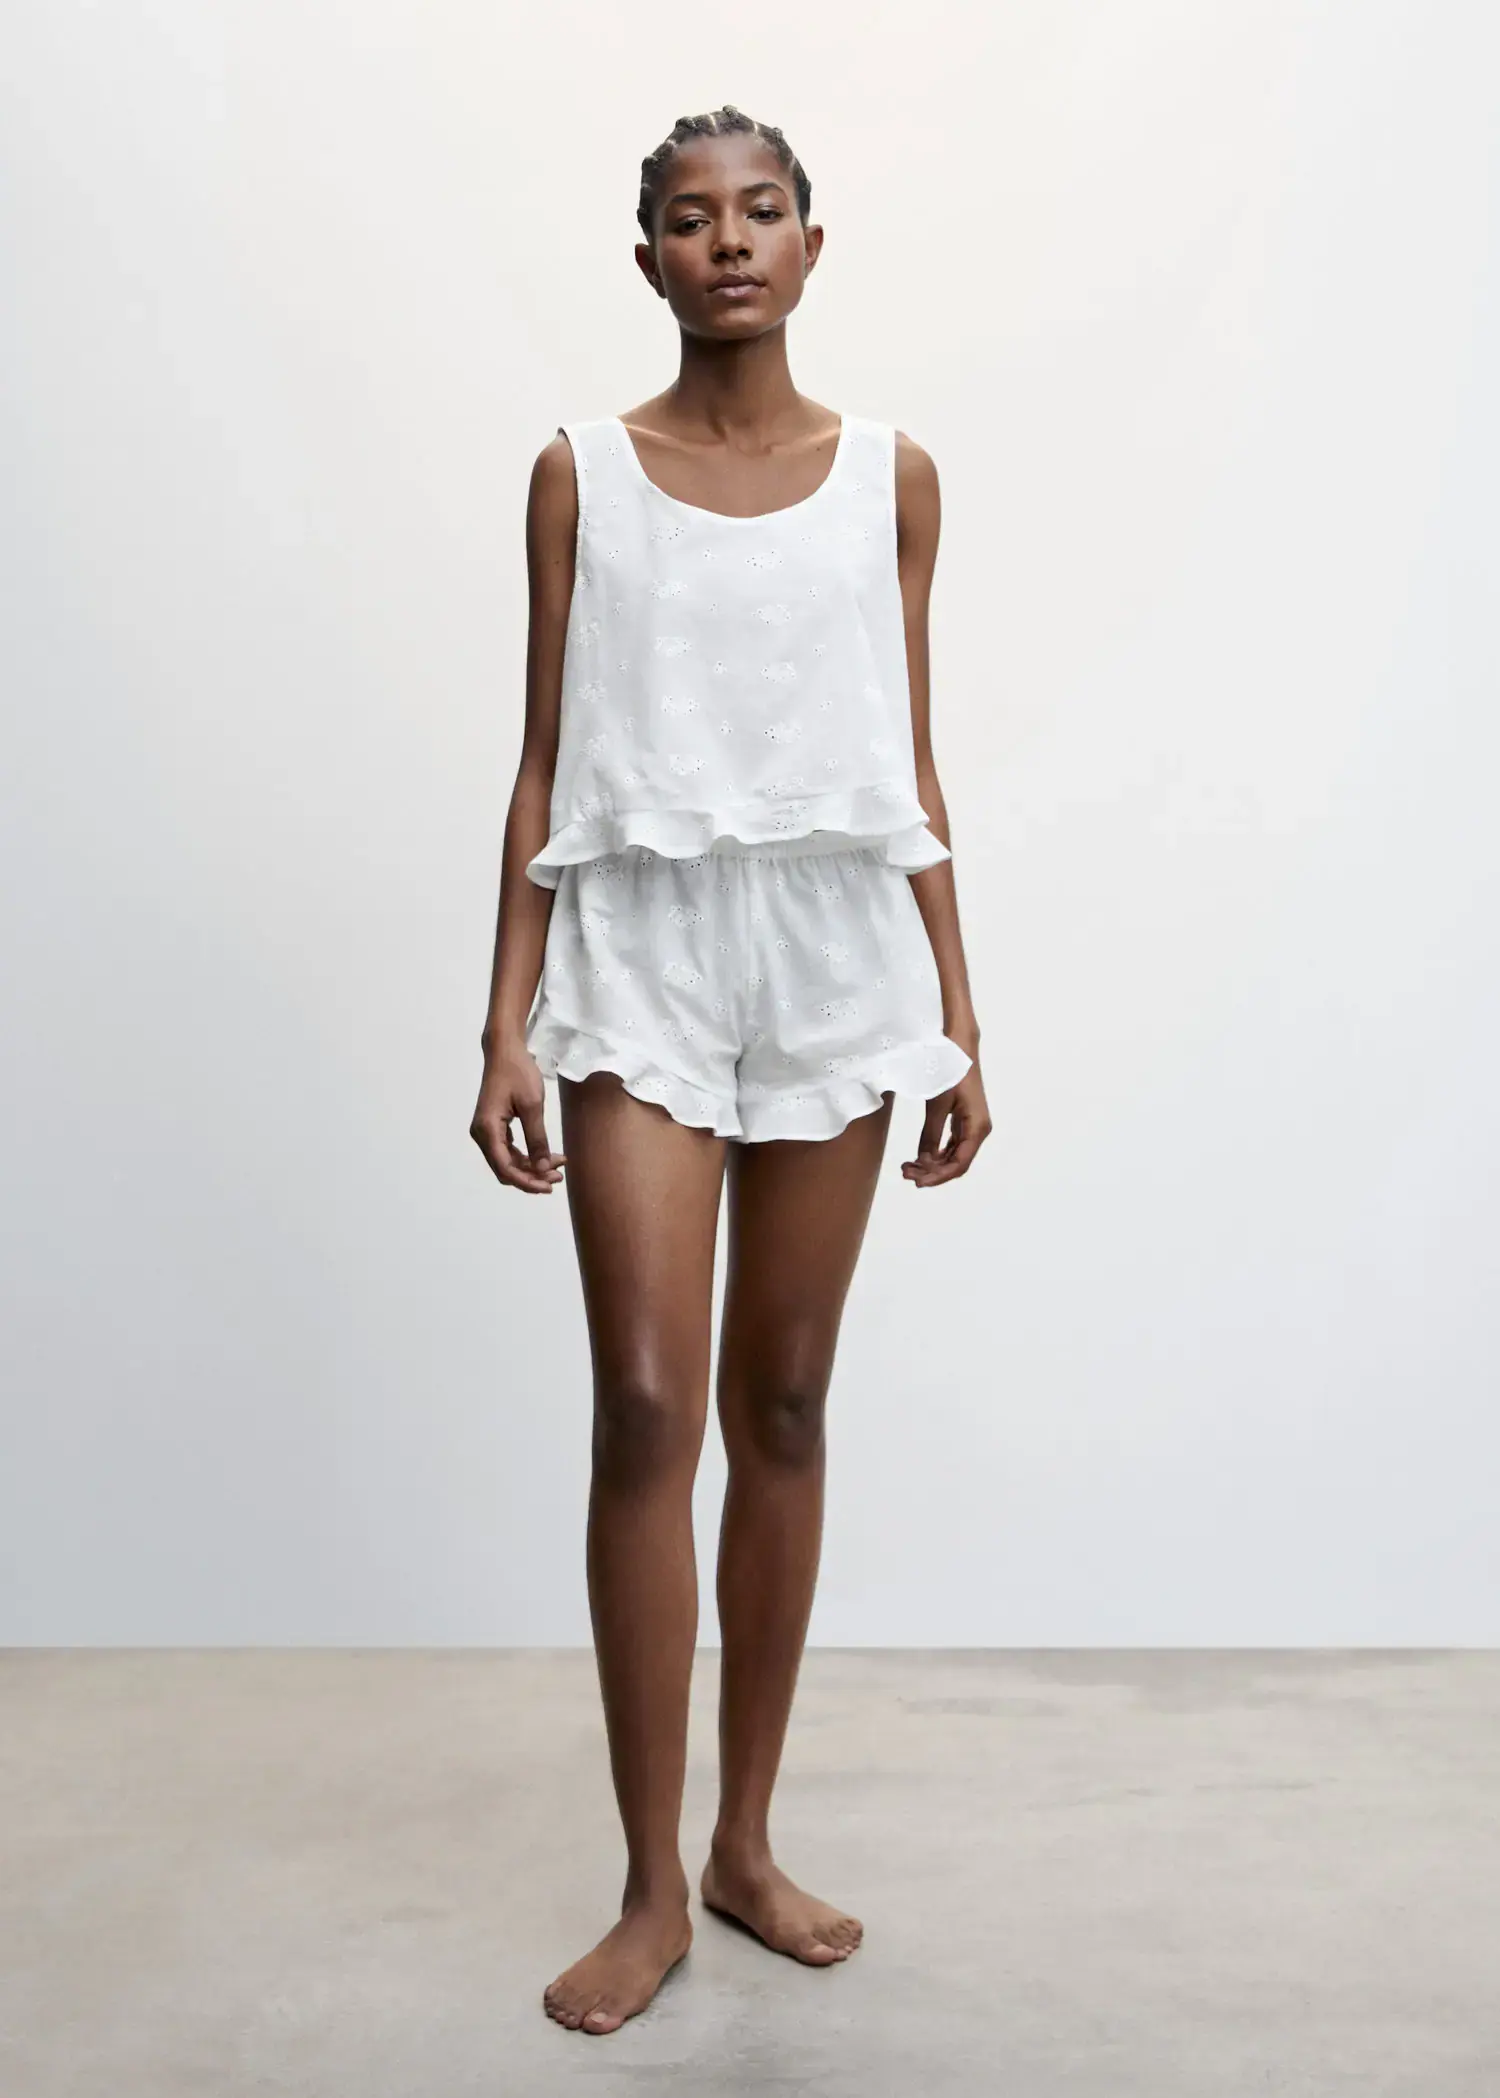 Mango Pyjama top with openwork details. a woman standing in a room wearing white shorts and a top. 